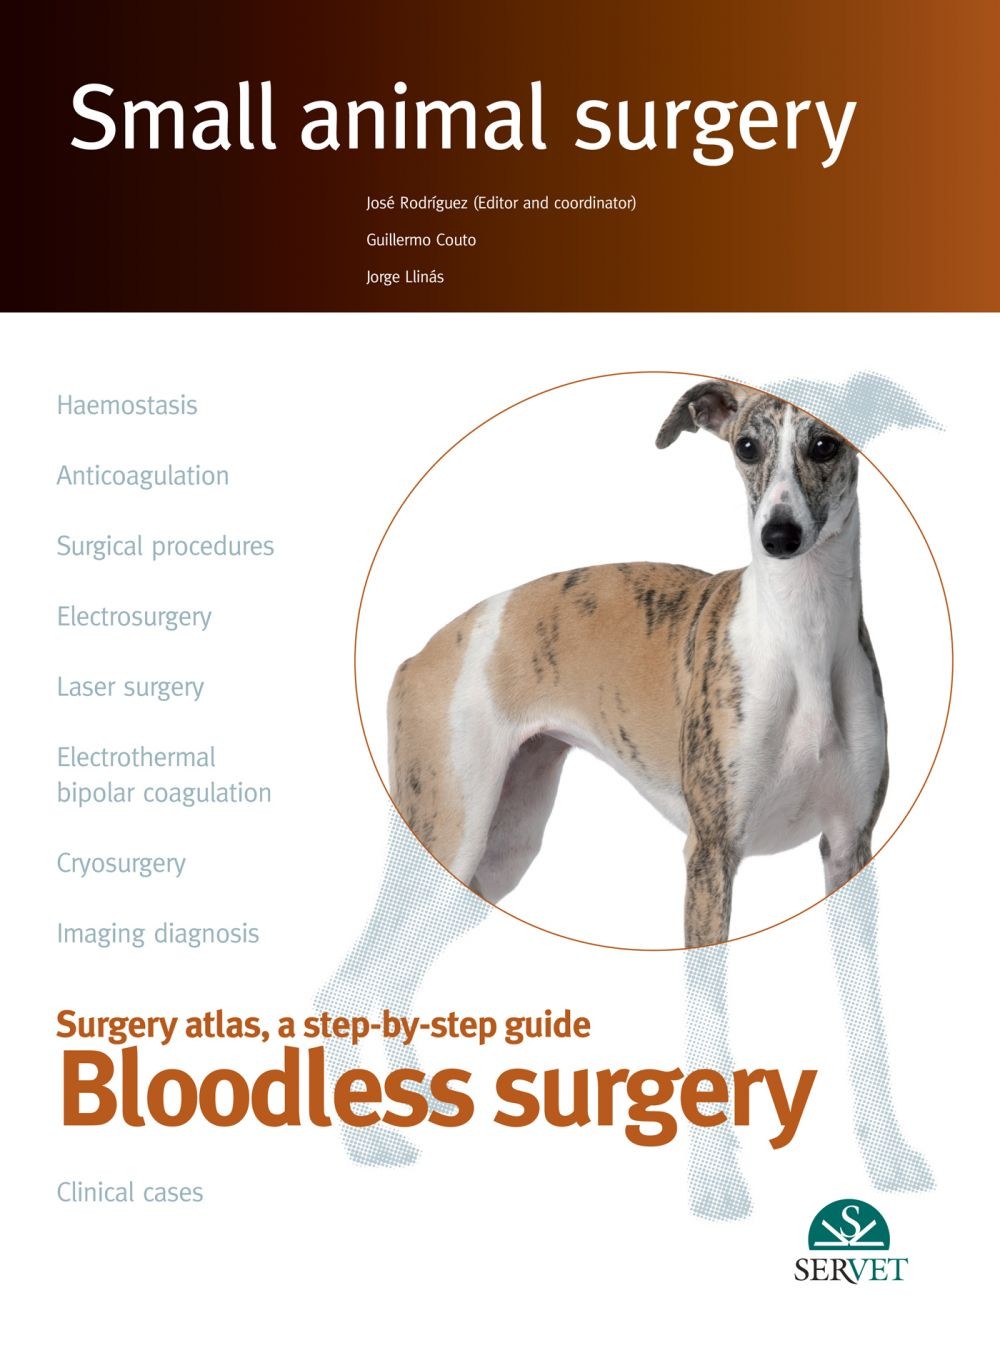 Small Animal Surgery. Bloodless Surgery - Librerie.coop